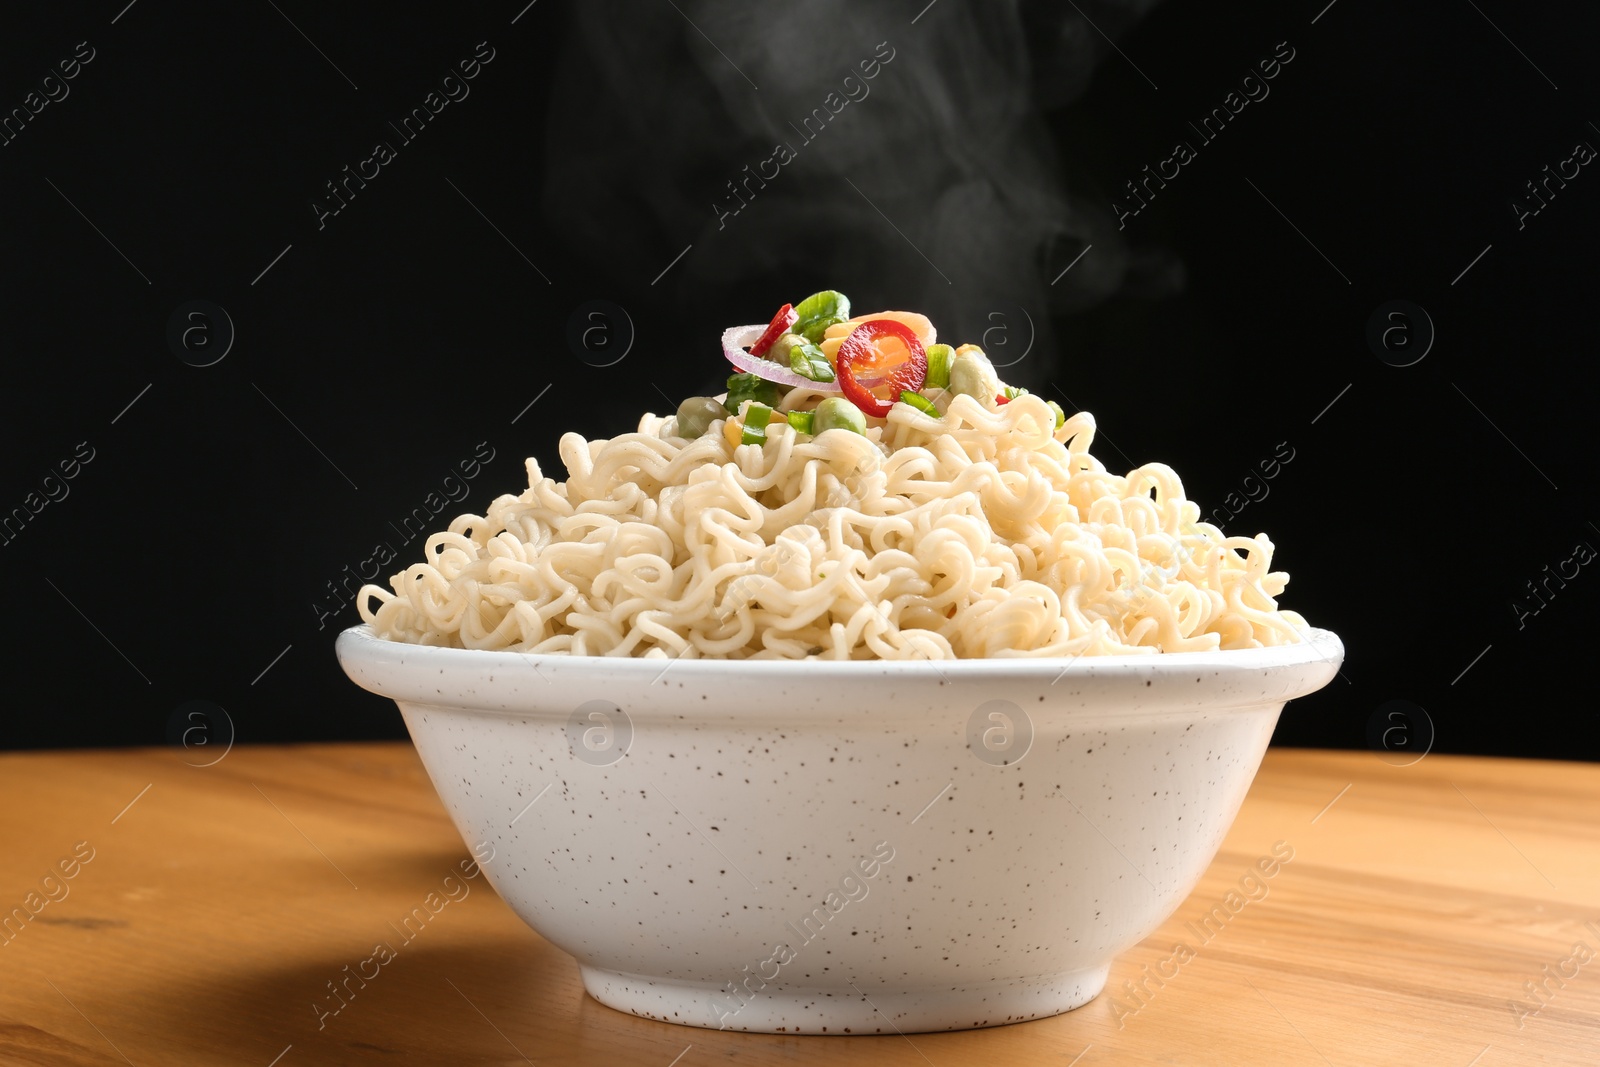 Photo of Bowl of hot noodles with vegetables on table against black background